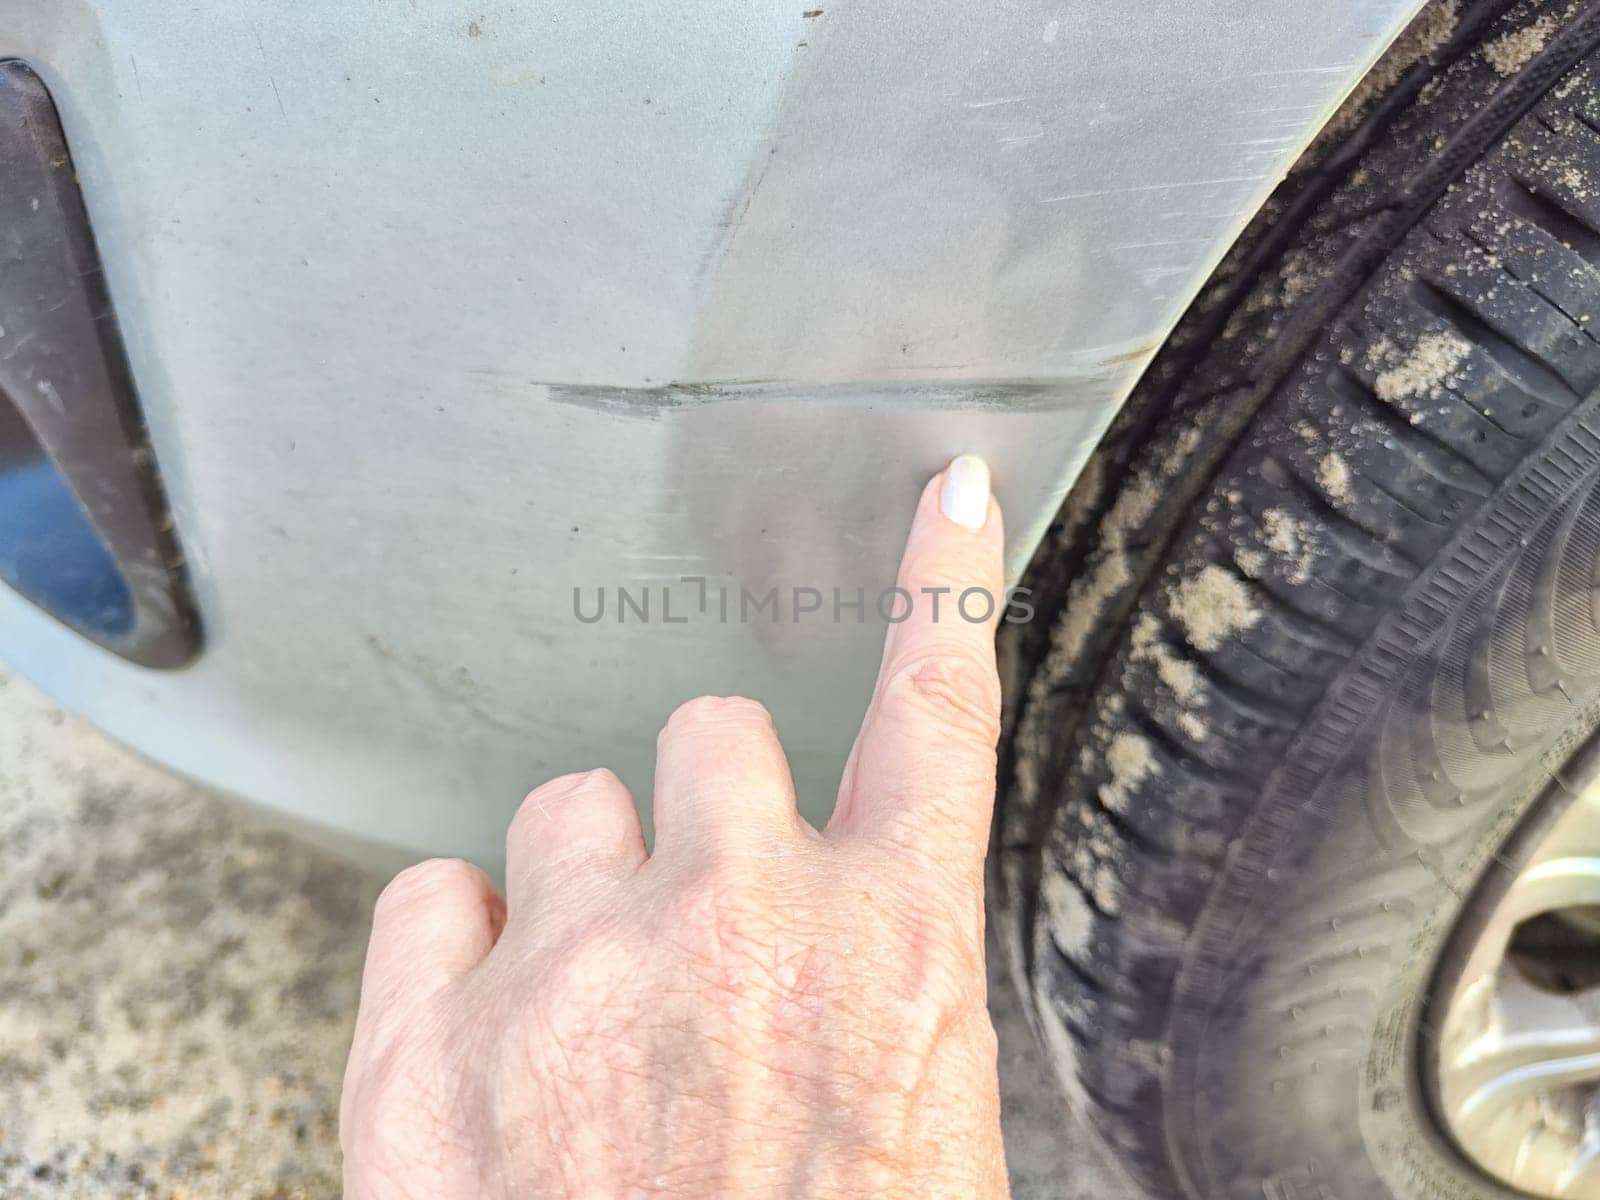 Finger indicating a scratch on a vehicles fender. Close-Up of Scratched Car Fender With Finger Pointing